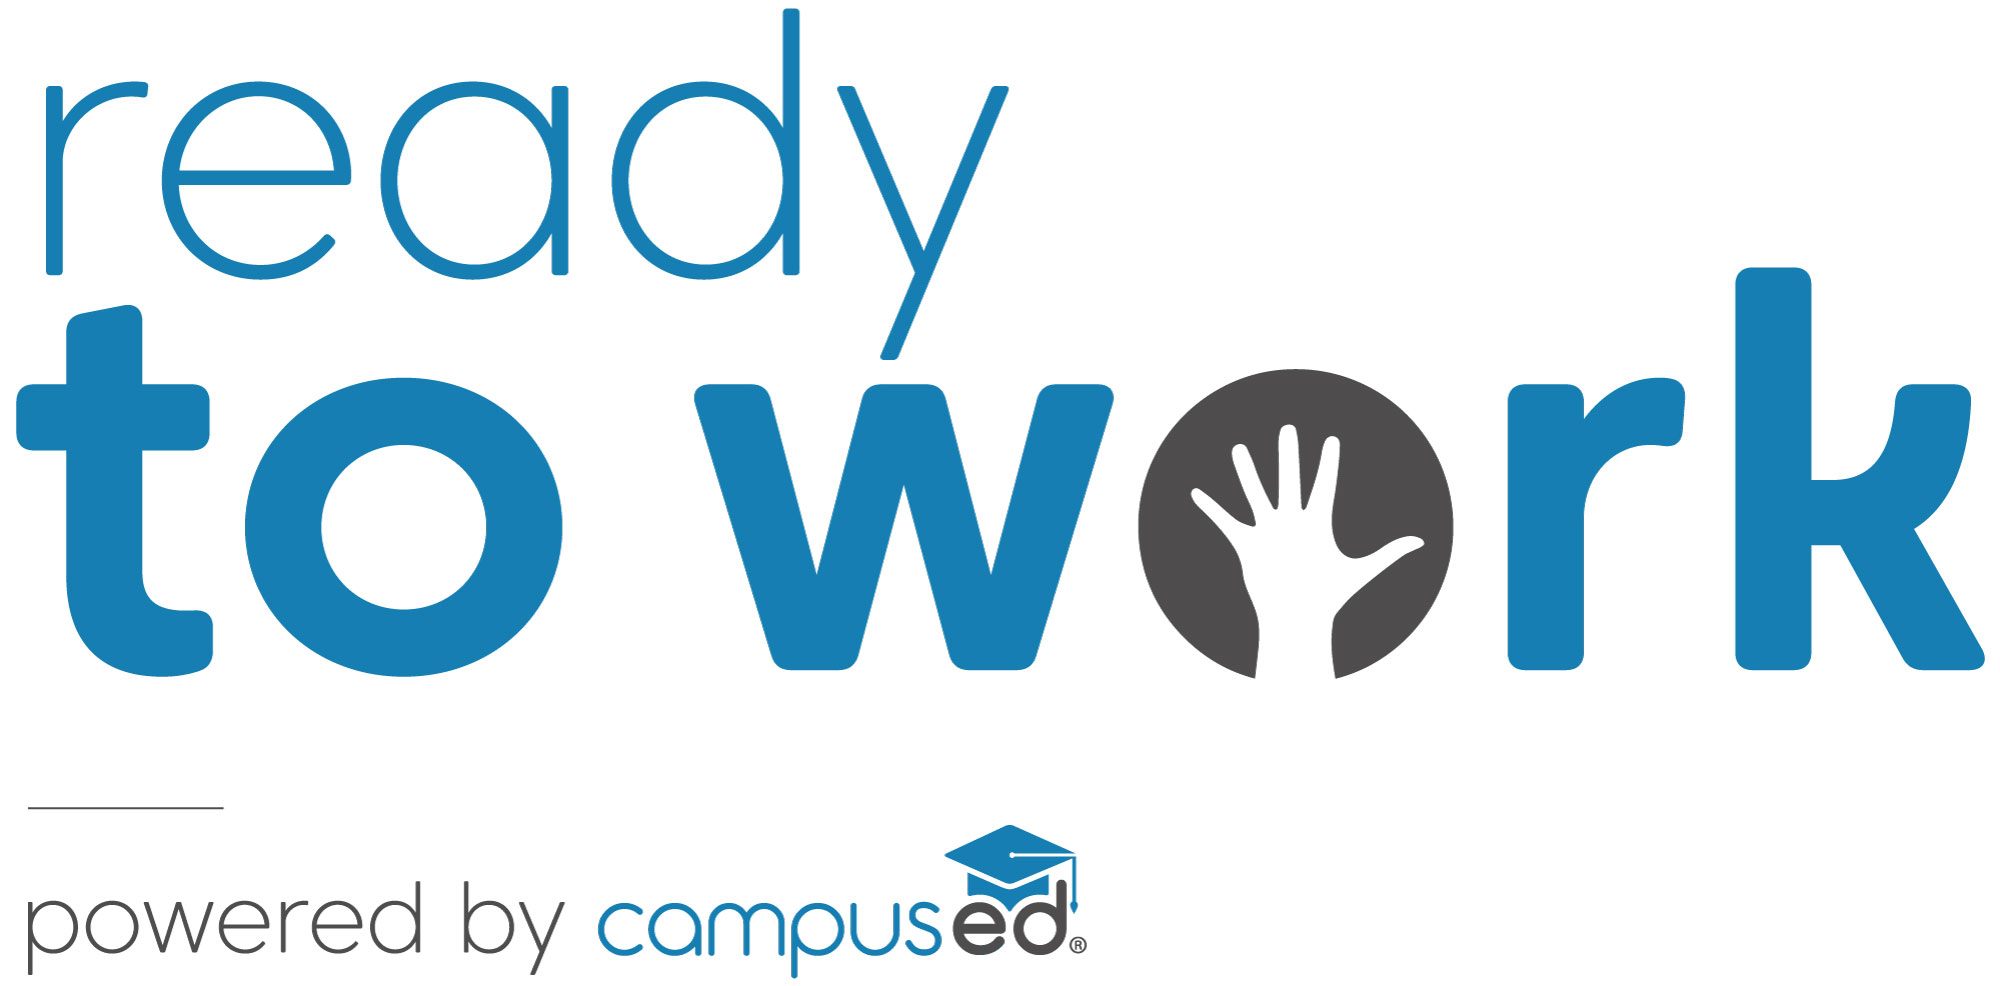 Ready to Work powered by CampusEd®